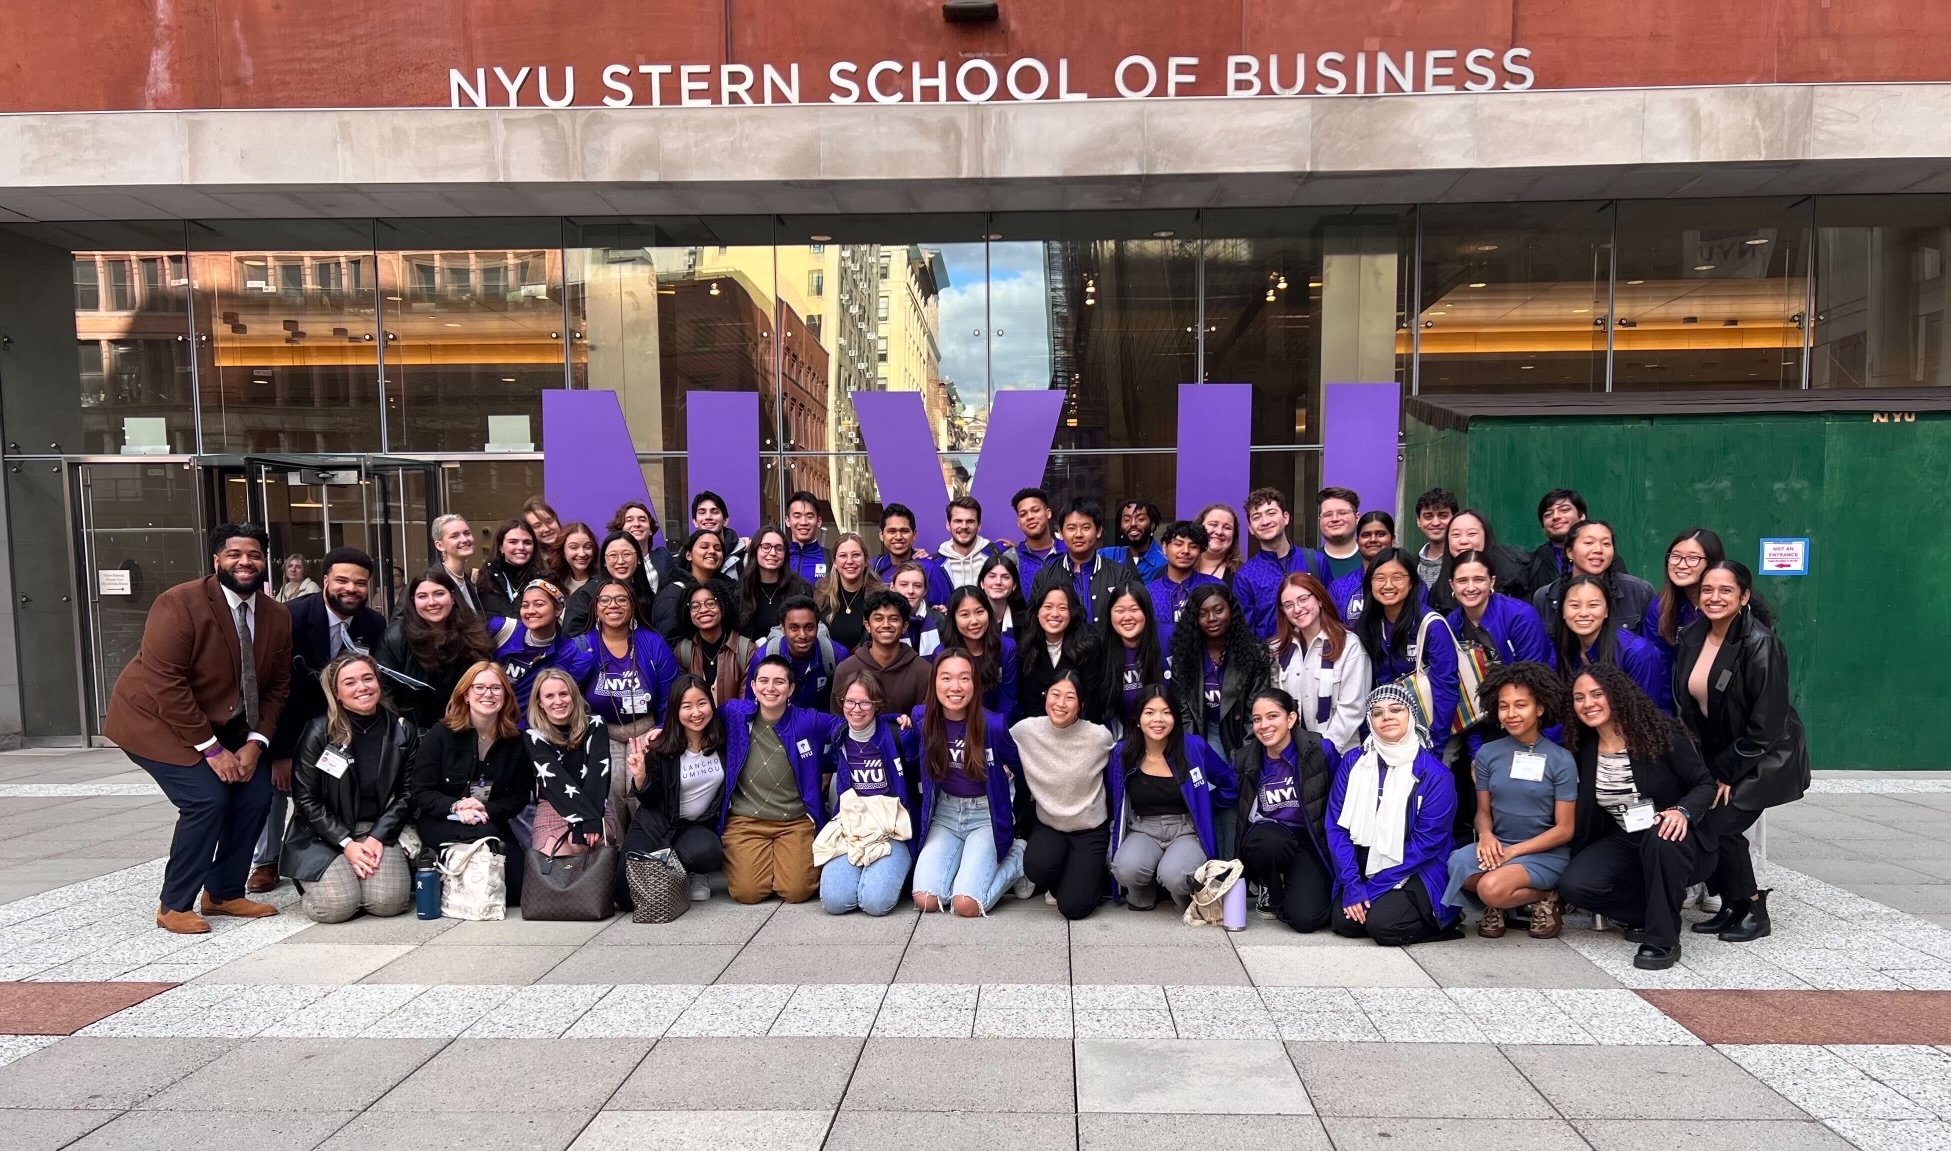 NYU Admissions Ambassadors pose together outside the NYU Stern School of Business. Being an Admissions Ambassador at NYU is an on-campus job.